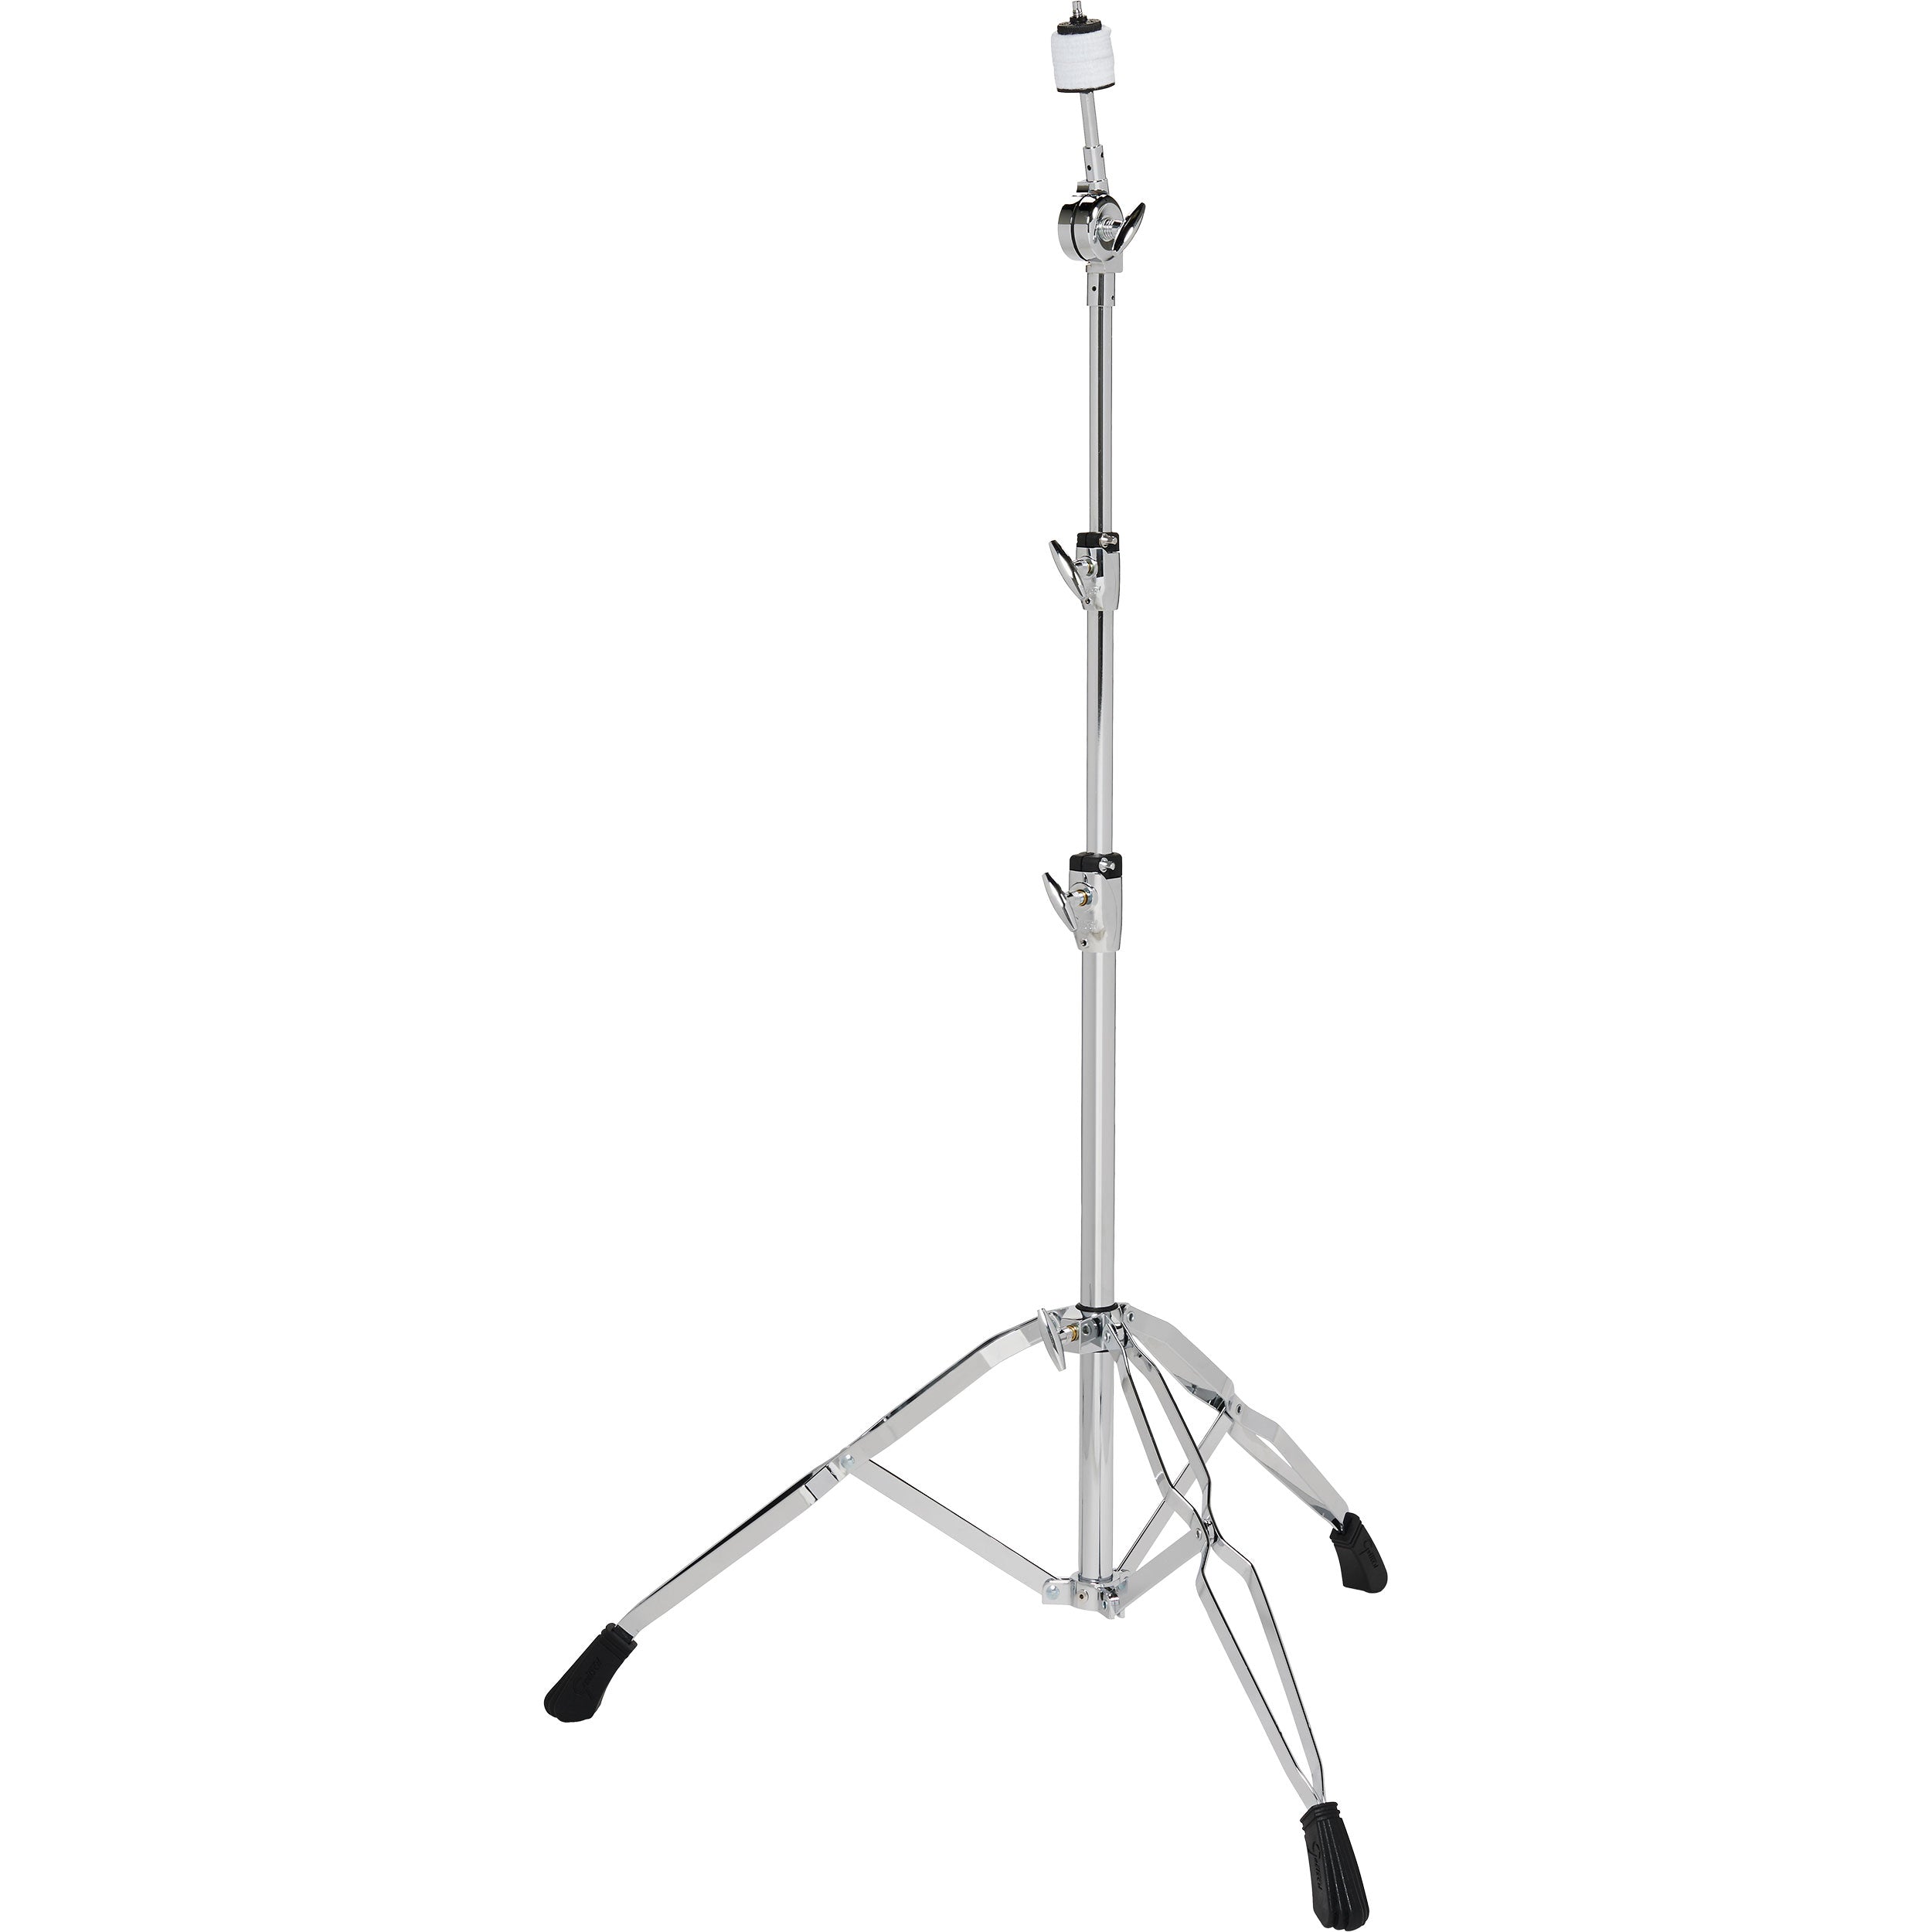 Gretsch Drums G3 Straight Cymbal Stand - Double Braced